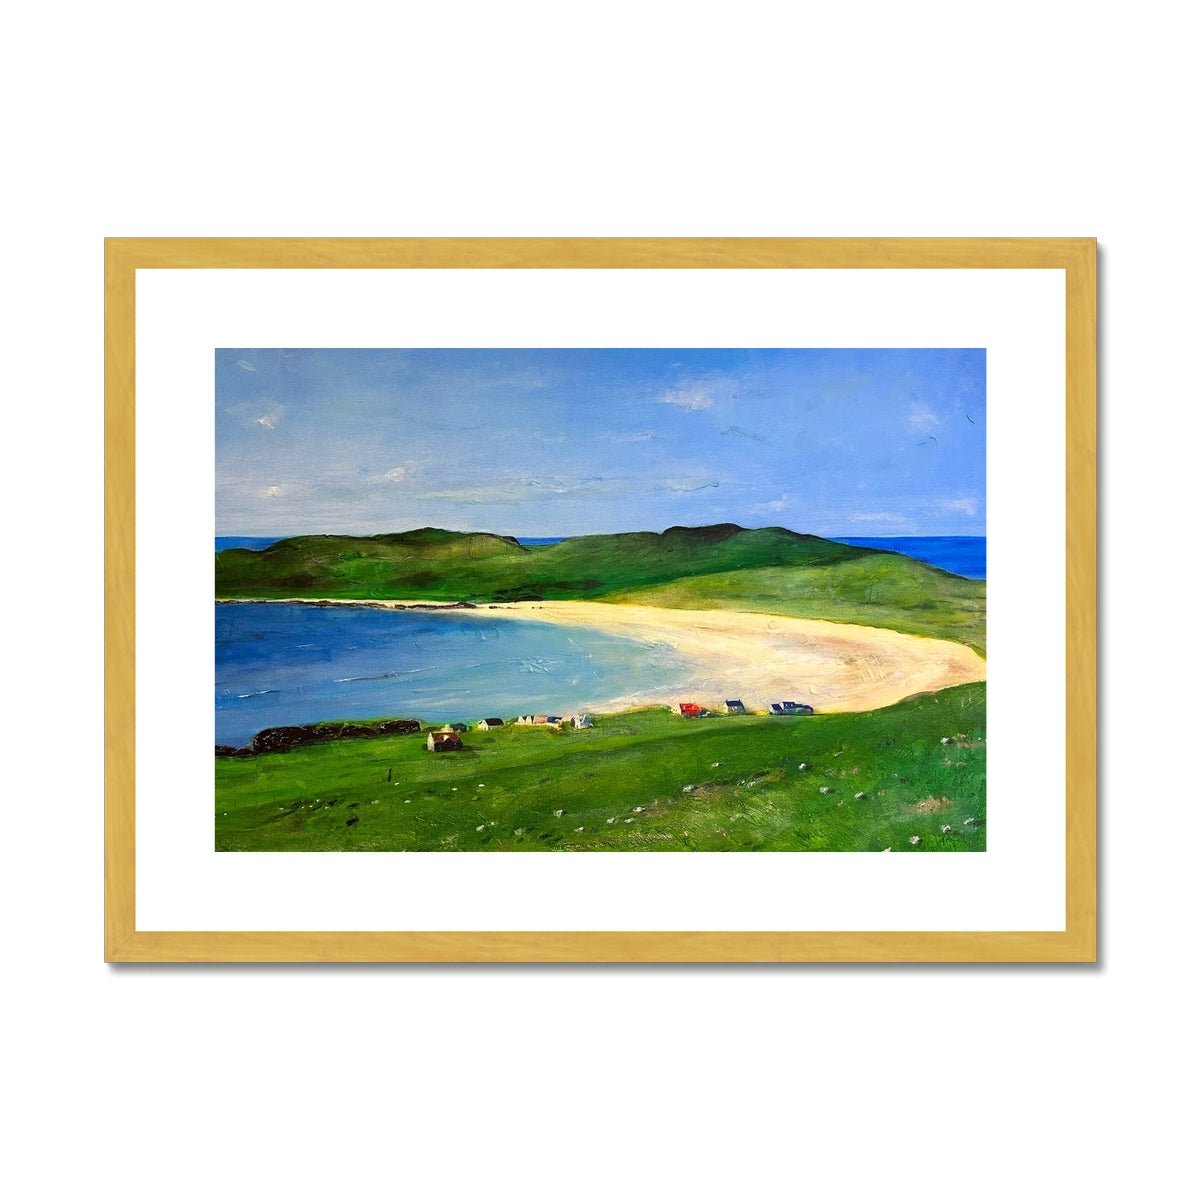 Balephuil Beach Tiree Painting | Antique Framed & Mounted Prints From Scotland-Antique Framed & Mounted Prints-Hebridean Islands Art Gallery-A2 Landscape-Gold Frame-Paintings, Prints, Homeware, Art Gifts From Scotland By Scottish Artist Kevin Hunter